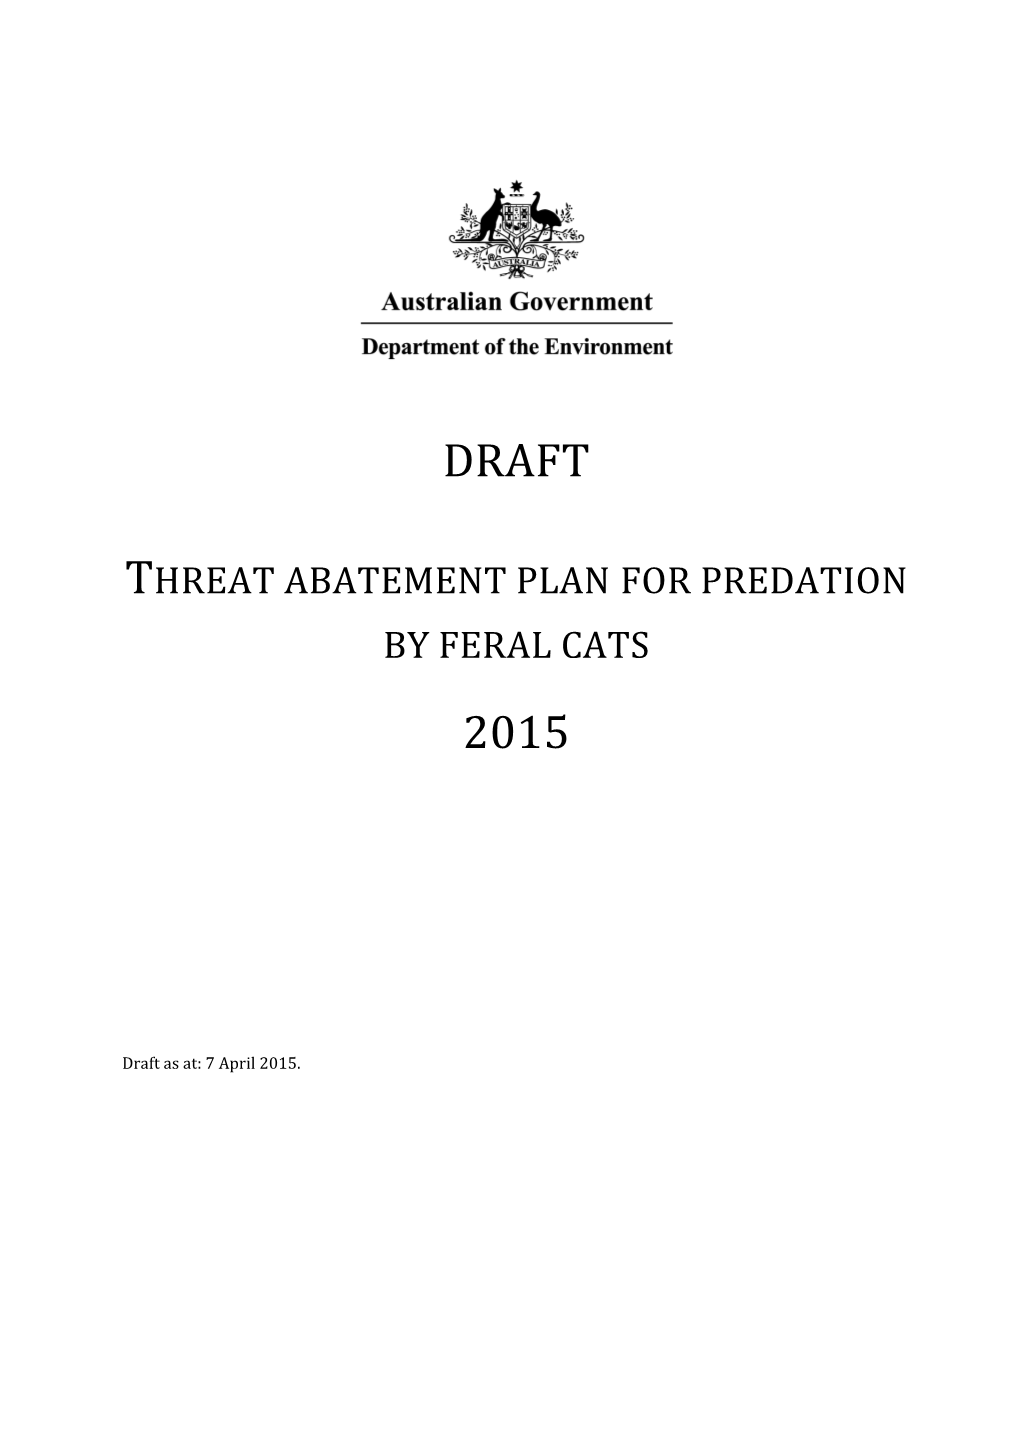 Draft Threat Abatement Plan for Predation by Feral Cats